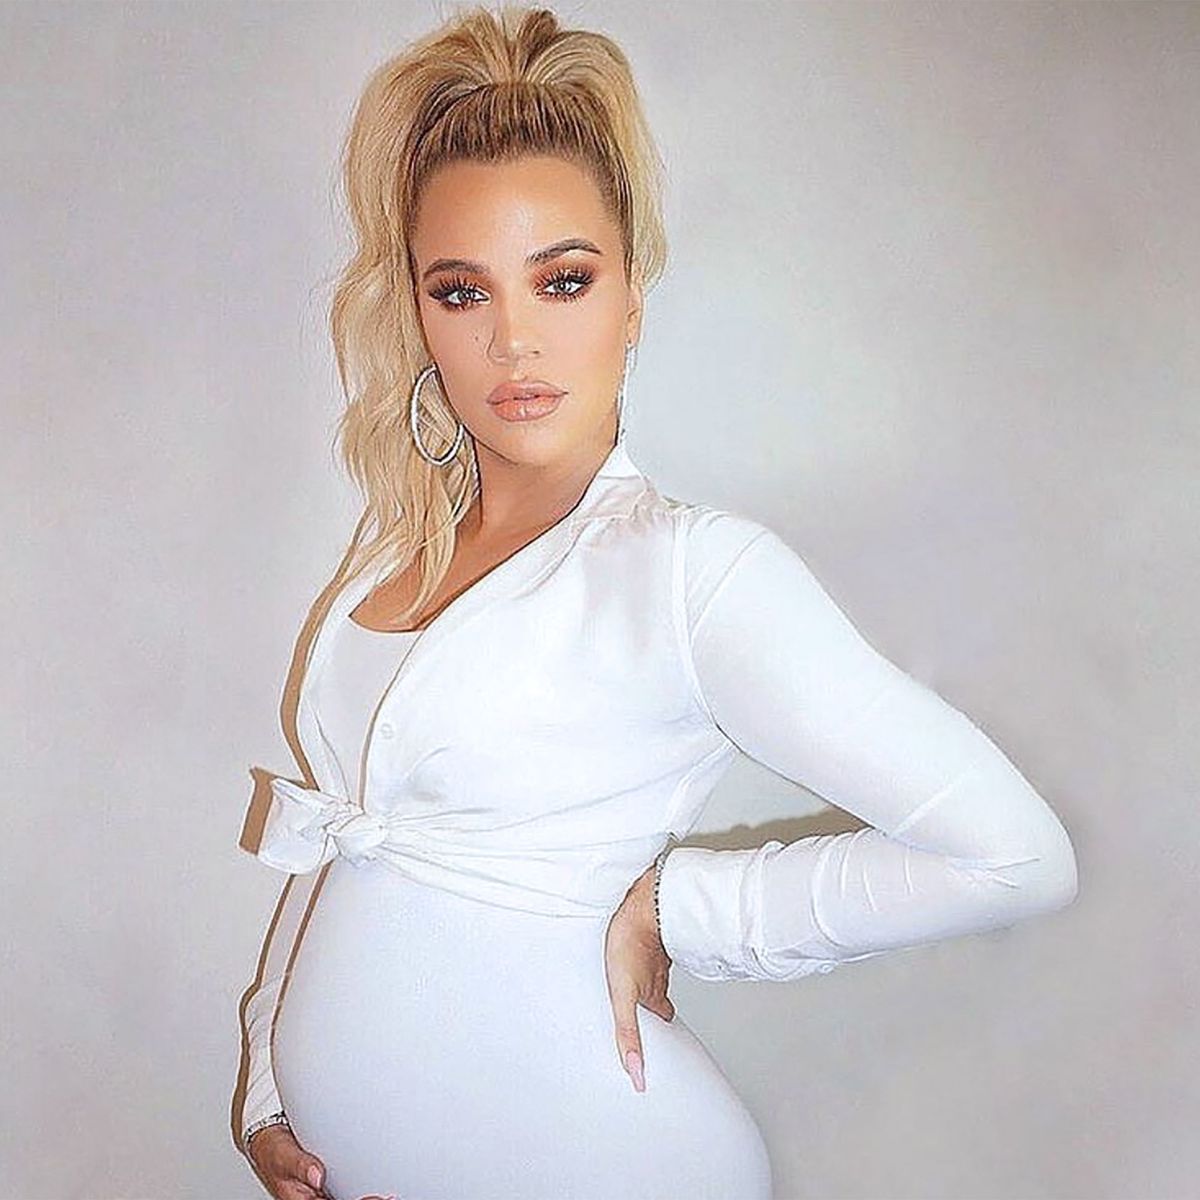 Khloé Kardashian Asks Twitter a Question About Her Growing Baby Bump